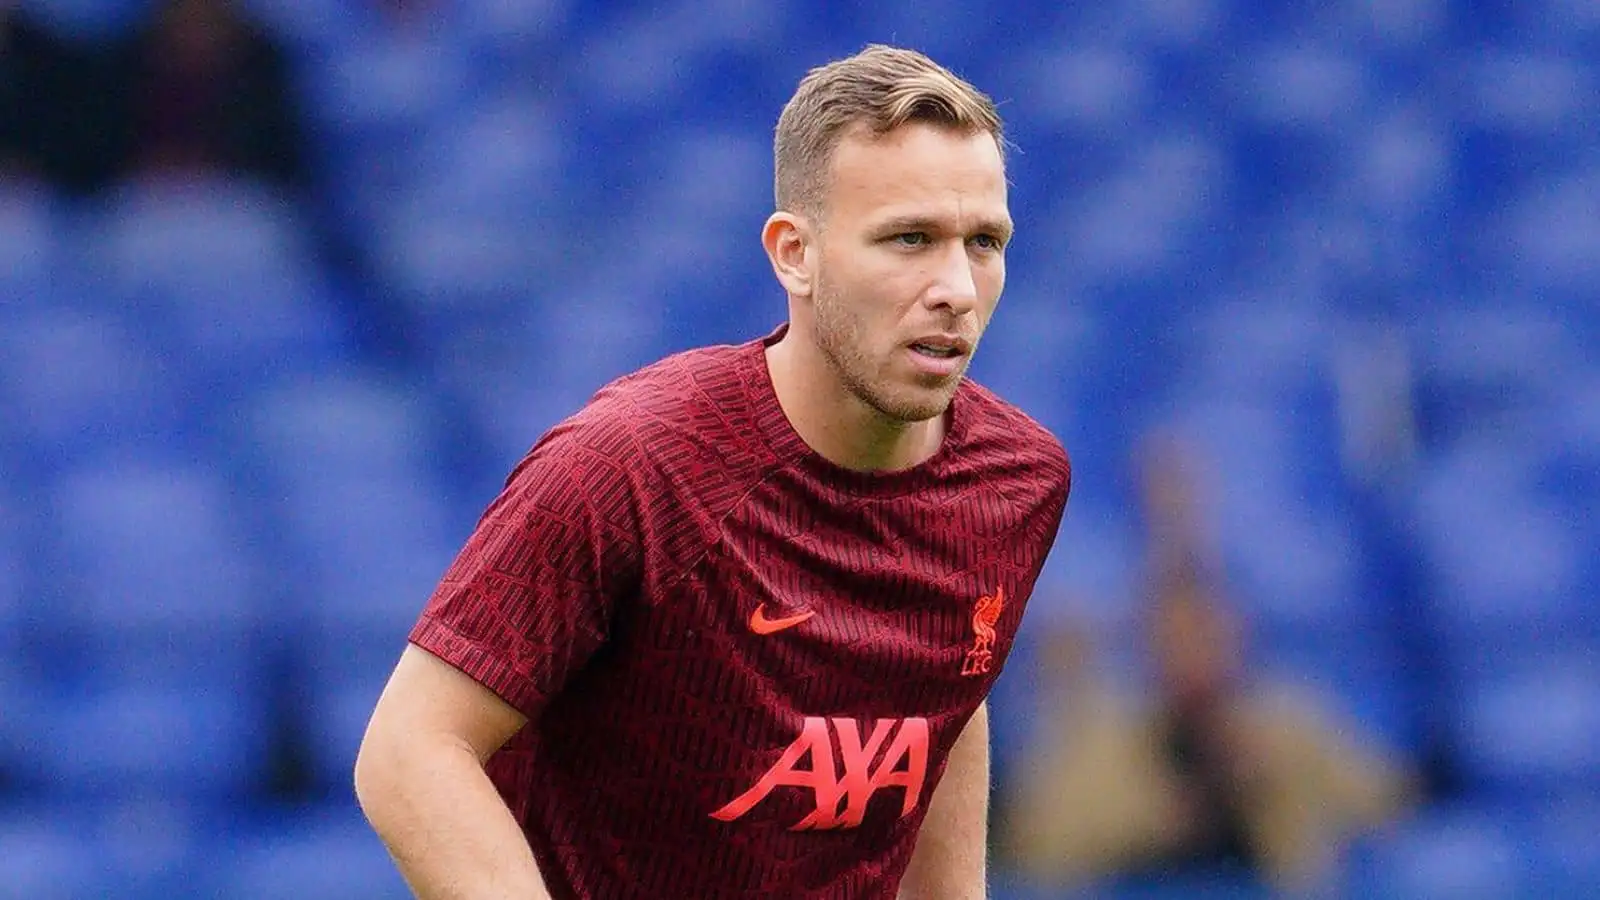 Arthur Melo, LIverpool midfielder, warms up at Goodison Park, before Premier League game v Everton